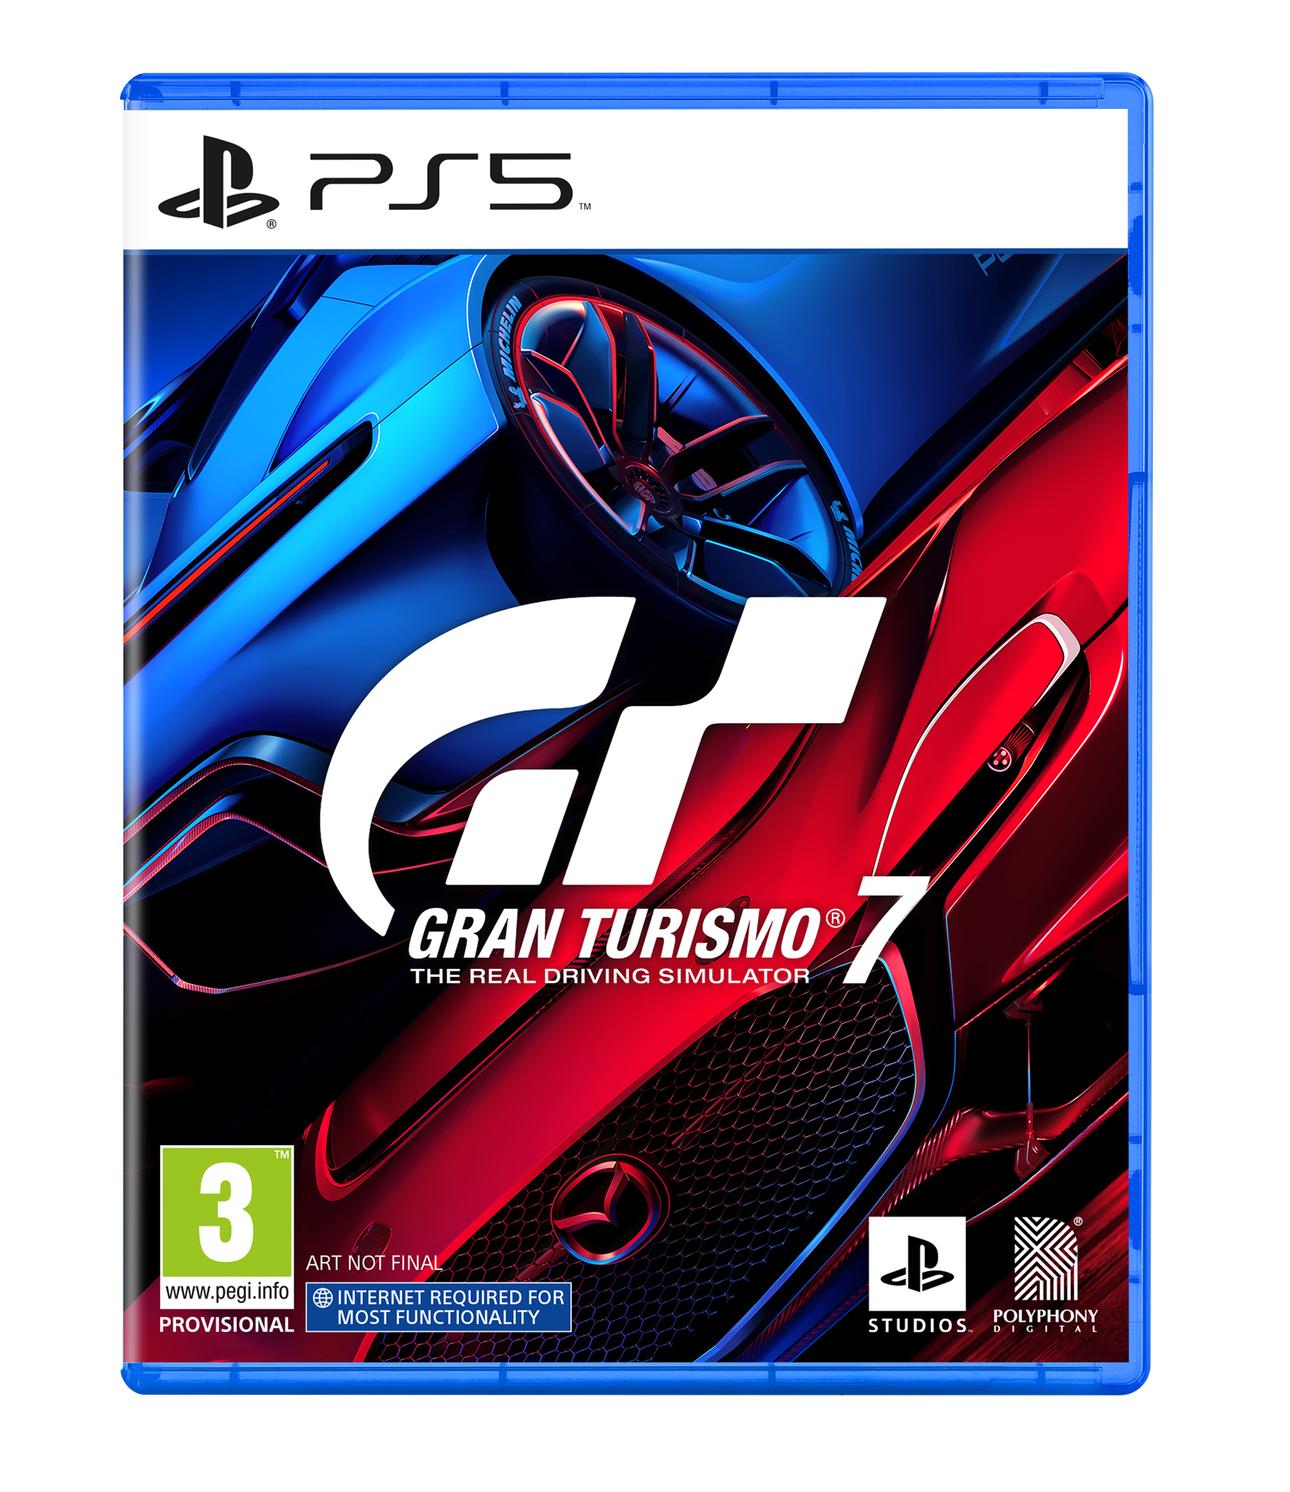 Offerta per Sony - Interactive Entertainment Gran Turismo 7 Standard Playstation 5 a 49,99€ in Comet